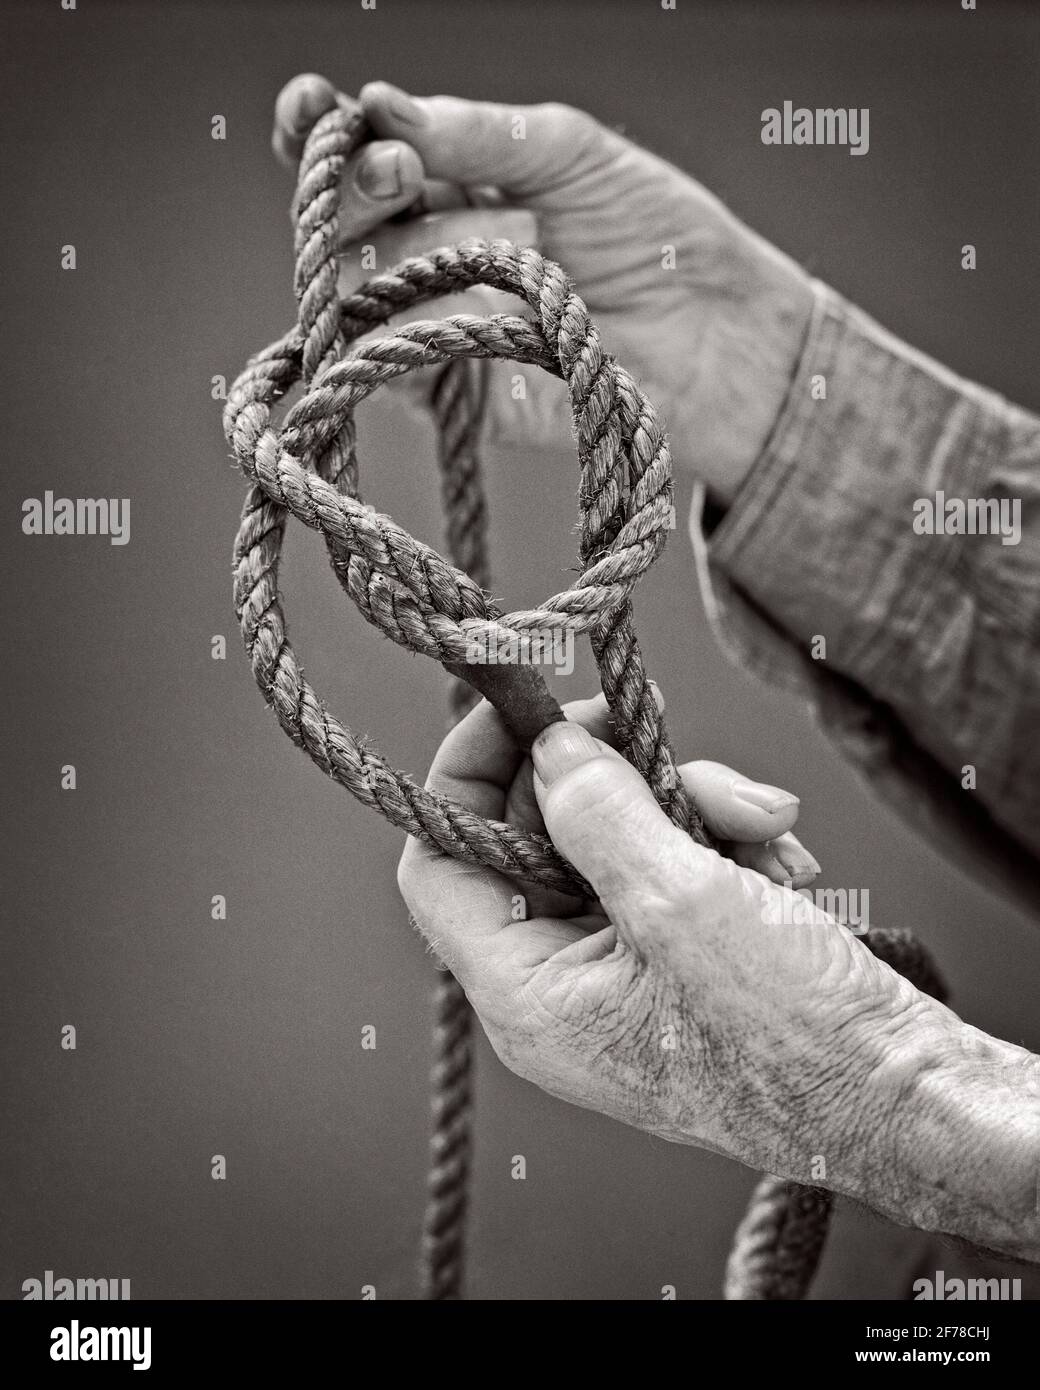 1920s 1930s 1940s BOWLINE KNOT DEMONSTRATED BY ROUGH WORN HANDS OF SENIOR EXPERIENCED MAN SAILOR - s7711 HAR001 HARS PERSONS MALES SYMBOLS ROUGH CONFIDENCE SENIOR MAN SENIOR ADULT B&W OLD AGE OLDSTERS OLDSTER BOTH STRENGTH AND EXPERIENCED CHOICE KNOWLEDGE POWERFUL PRIDE BY OF TO SIMPLE ELDERS KNOT CONCEPT CONNECTION CONCEPTUAL RELIABLE EASY IMPORTANT SYMBOLIC TYING UNTIE CONCEPTS IDEAS PRECISION SECURE SOLUTIONS VIRTUES WORN BASIC BLACK AND WHITE CAUCASIAN ETHNICITY HANDS ONLY HAR001 OLD FASHIONED REPRESENTATION Stock Photo